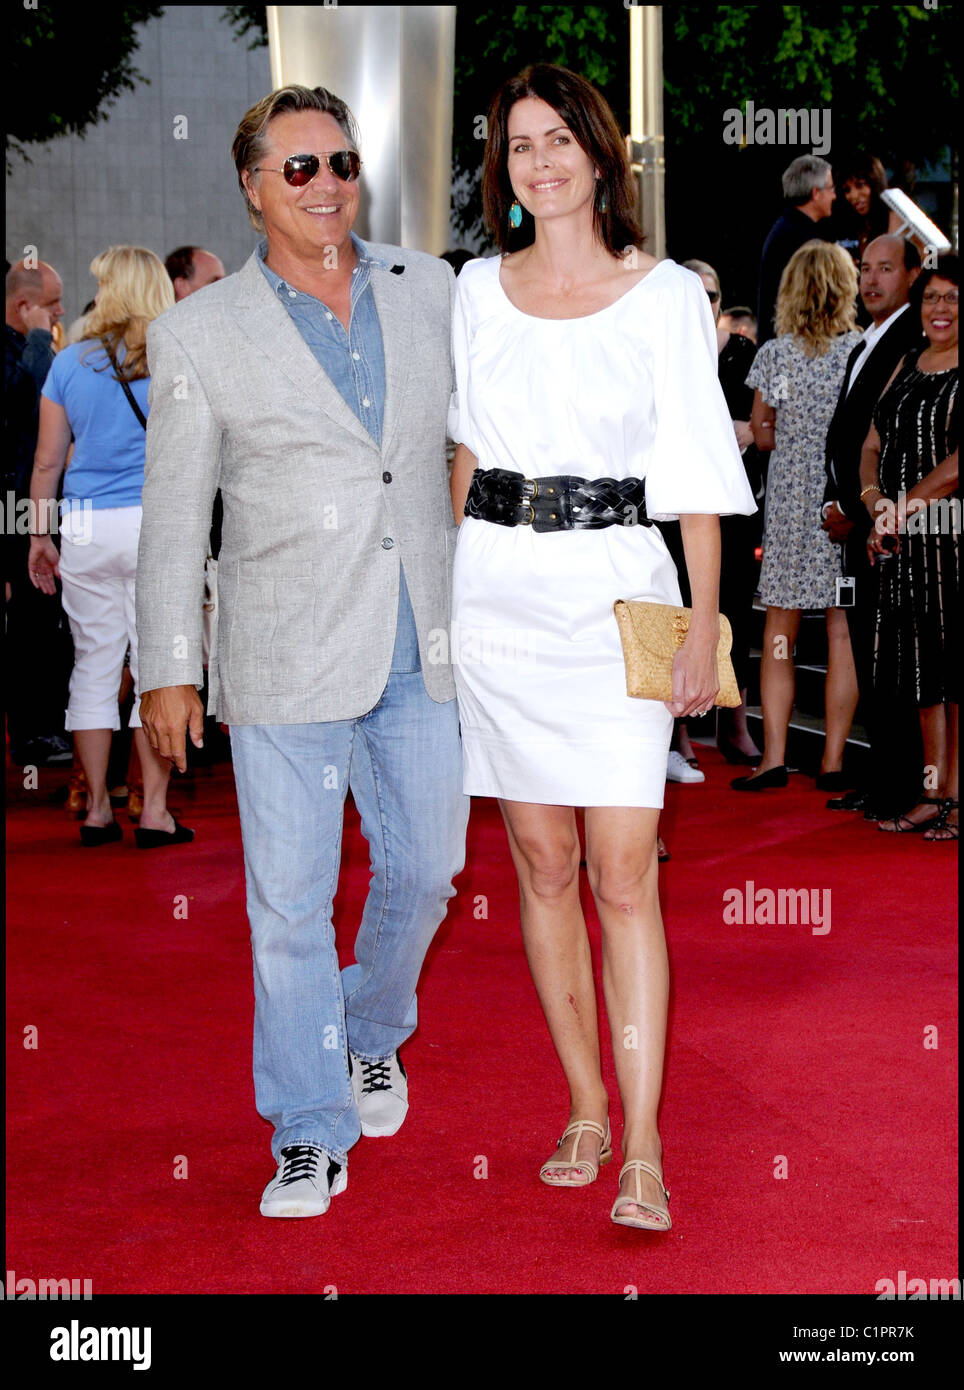 Don Johnson and his wife Kelley Phleger LA premiere of 